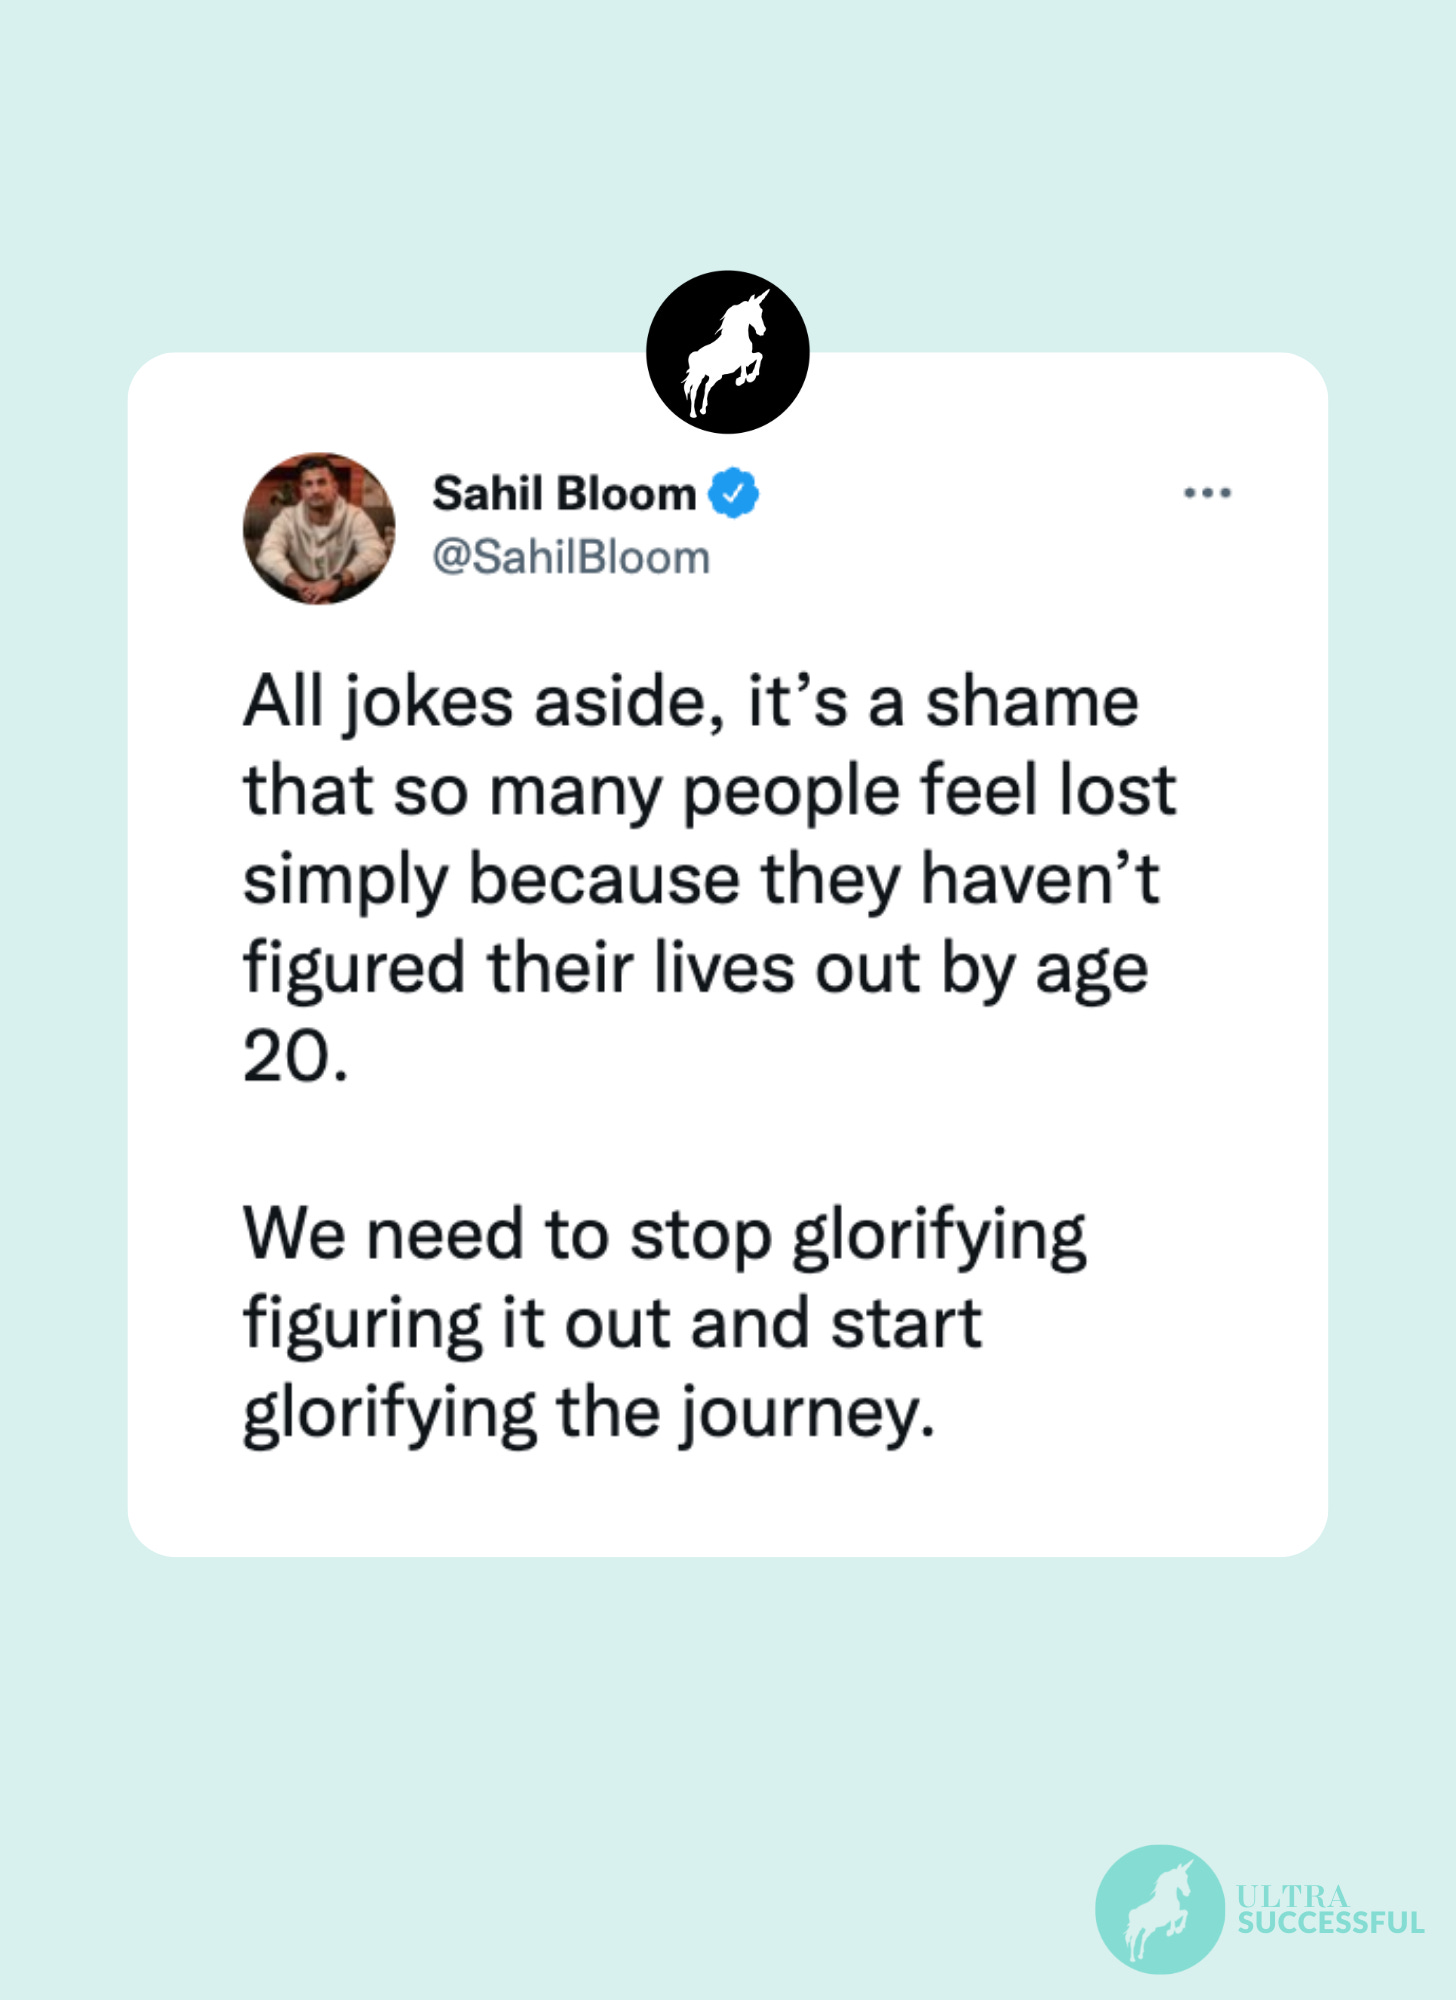 @sahilbloom: All jokes aside, it’s a shame that so many people feel lost simply because they haven’t figured their lives out by age 20.  We need to stop glorifying figuring it out and start glorifying the journey.